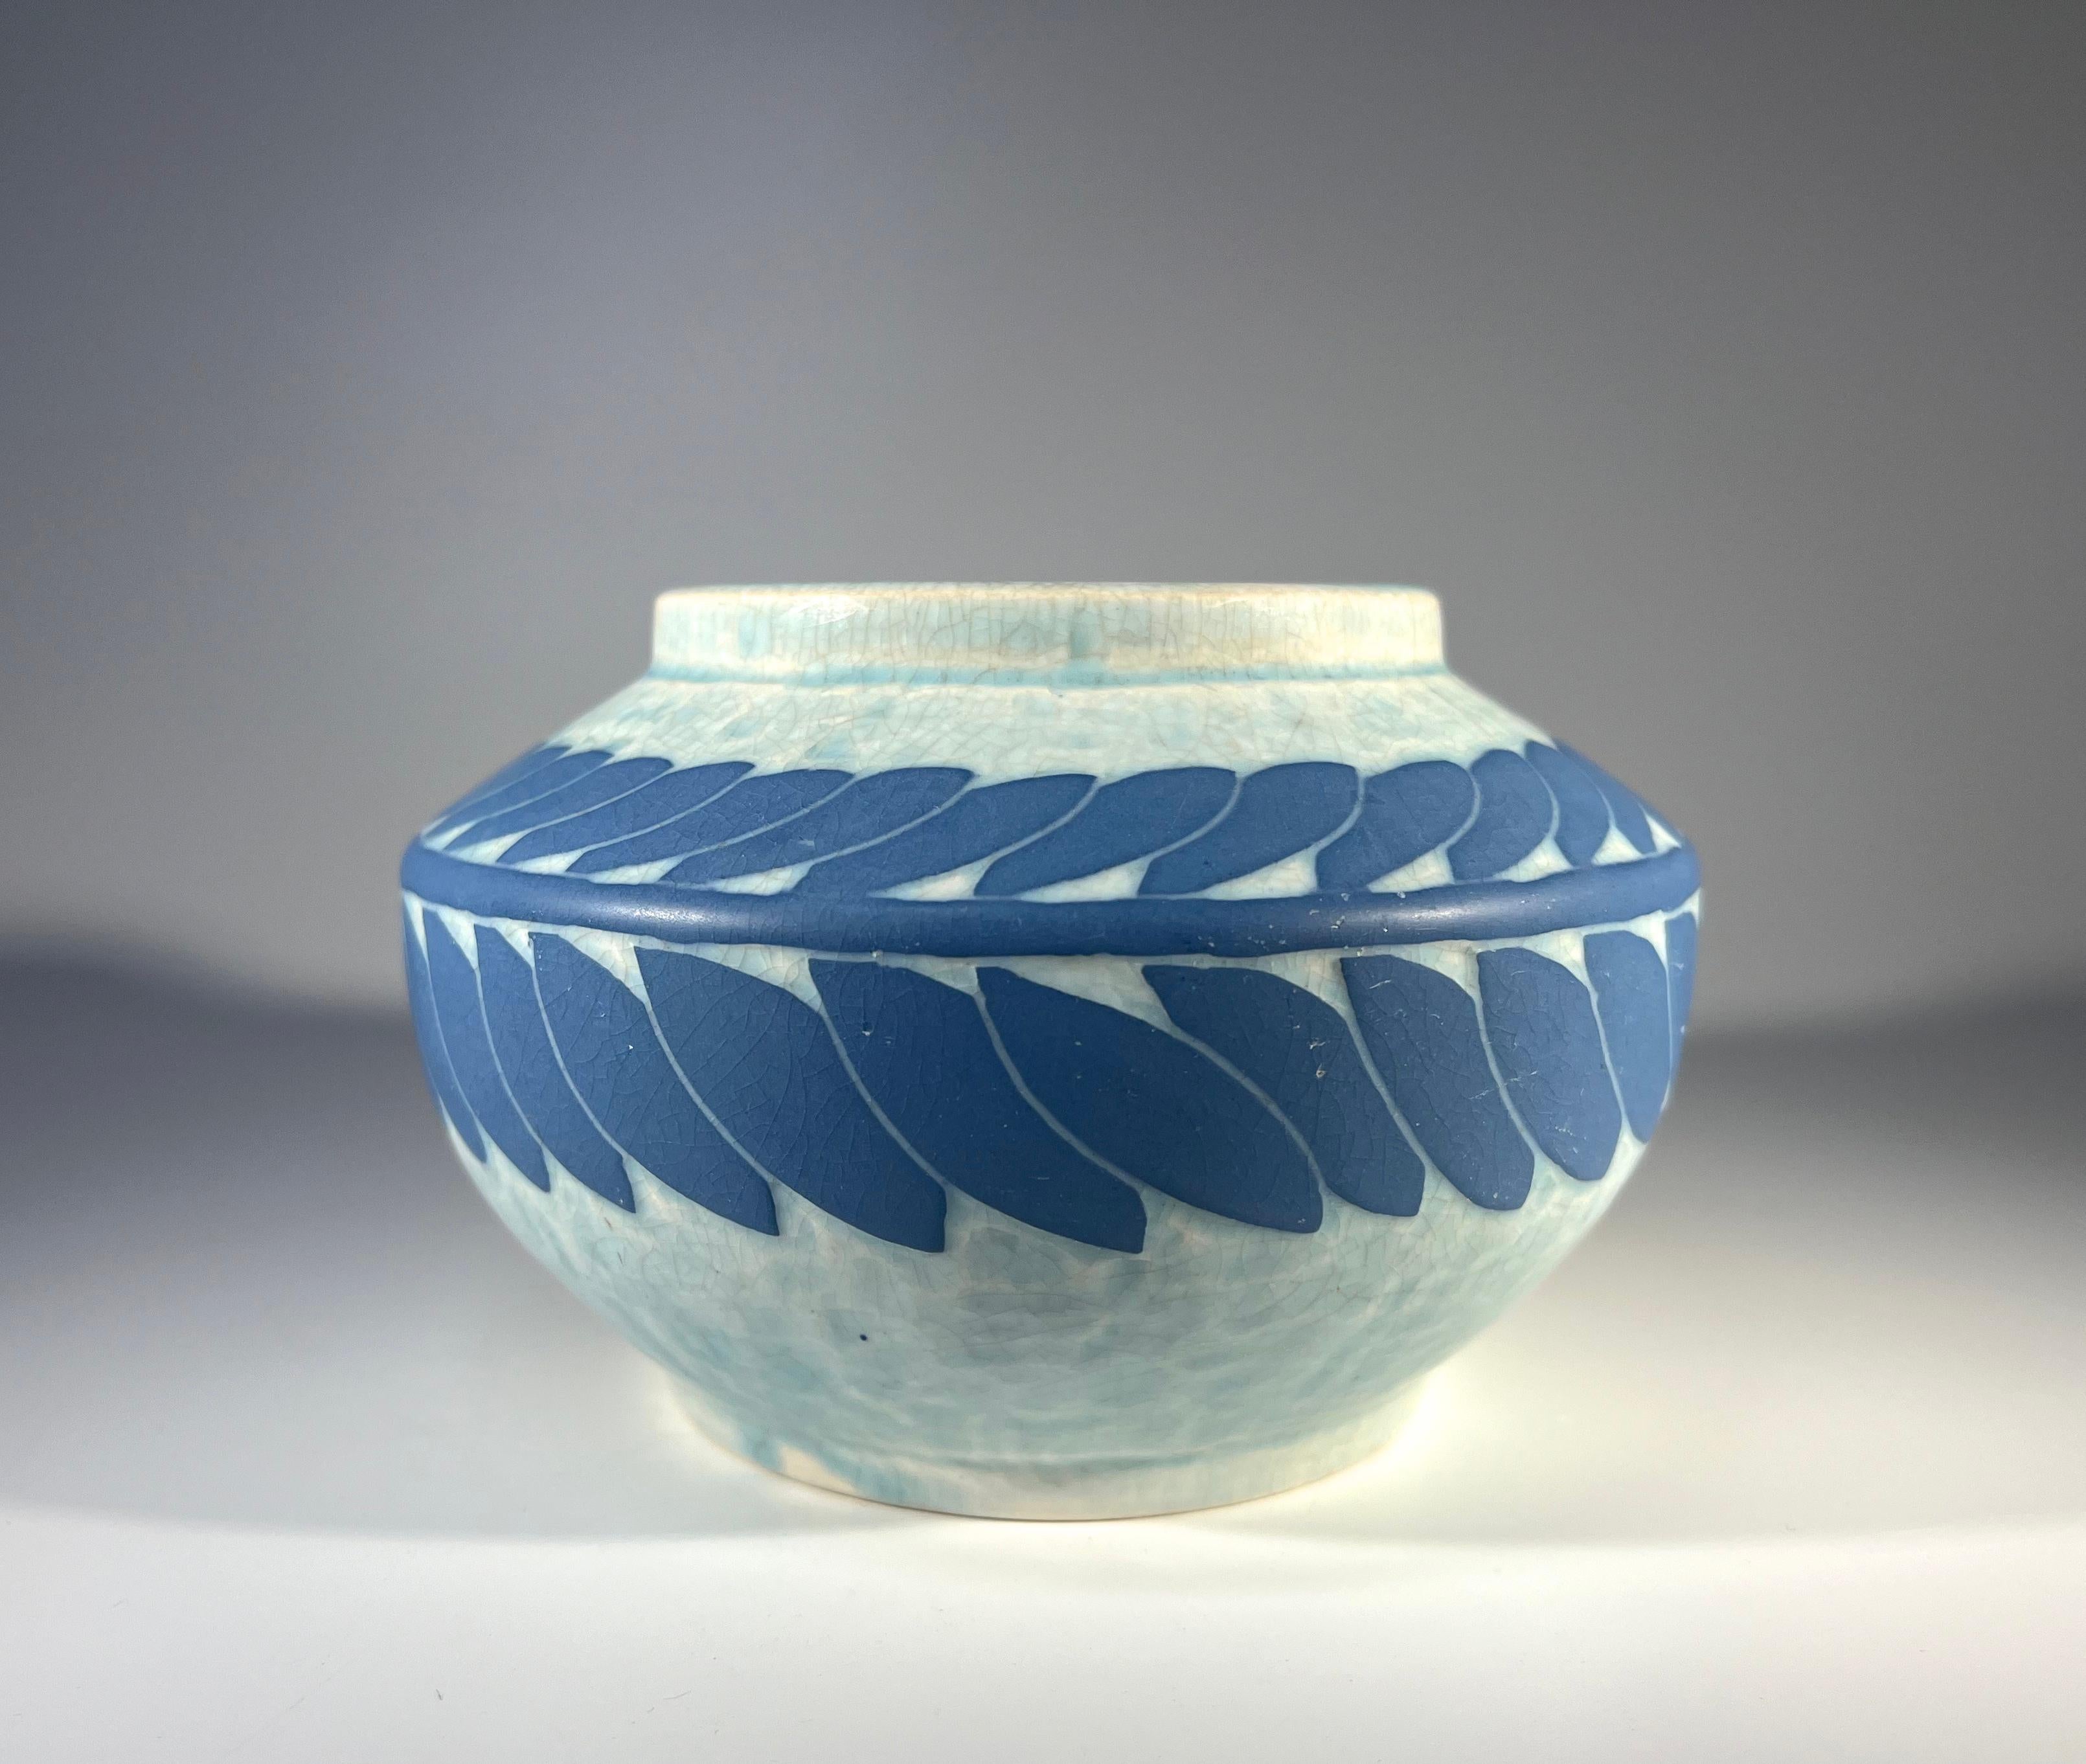 Art Deco sgraffito ceramic vase by Josef Ekberg for Gustavsberg. 
Layers consist of pale blue ground and a signature mid blue garland of leaves decoration
Signed Ekberg and dated 1910
Height 3.5 inch, Width 5.5 inch
A unique example of Ekberg's